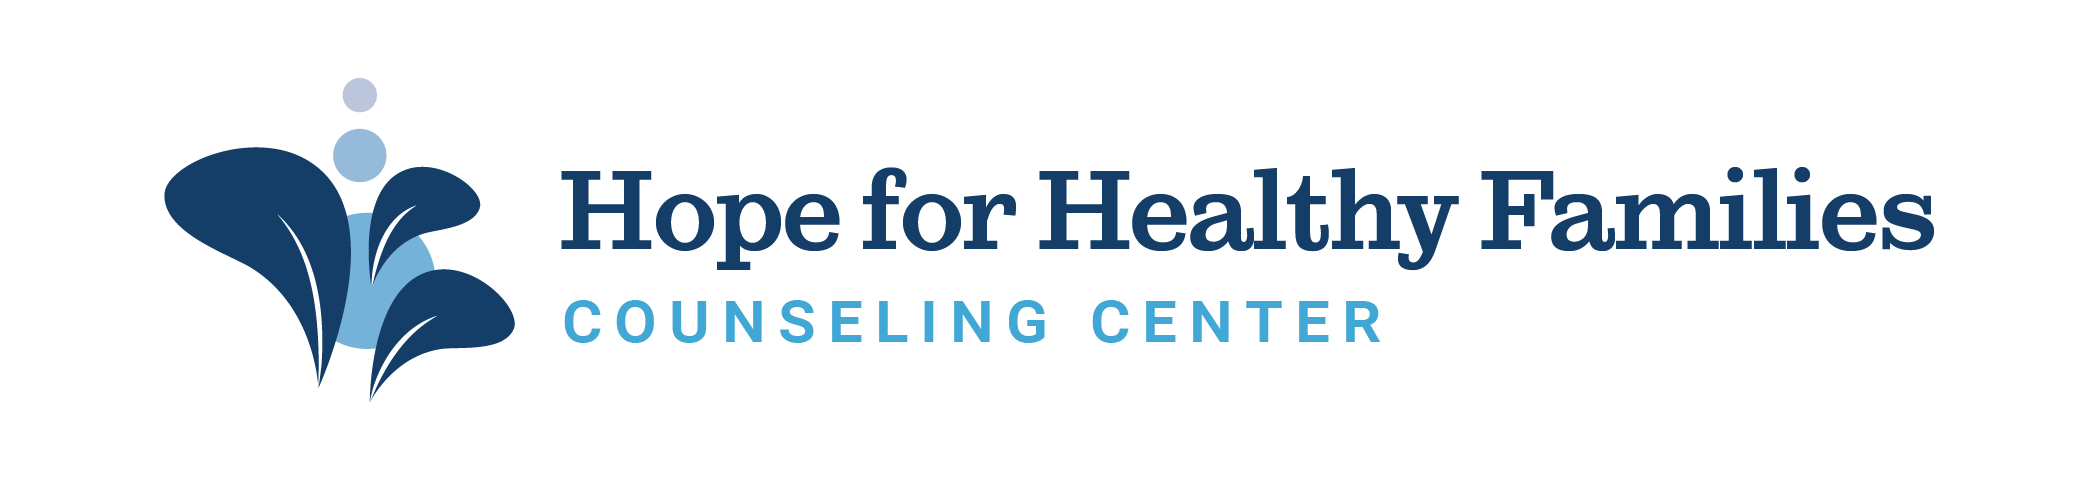 Hope for Healthy Families Counseling Center Coupon